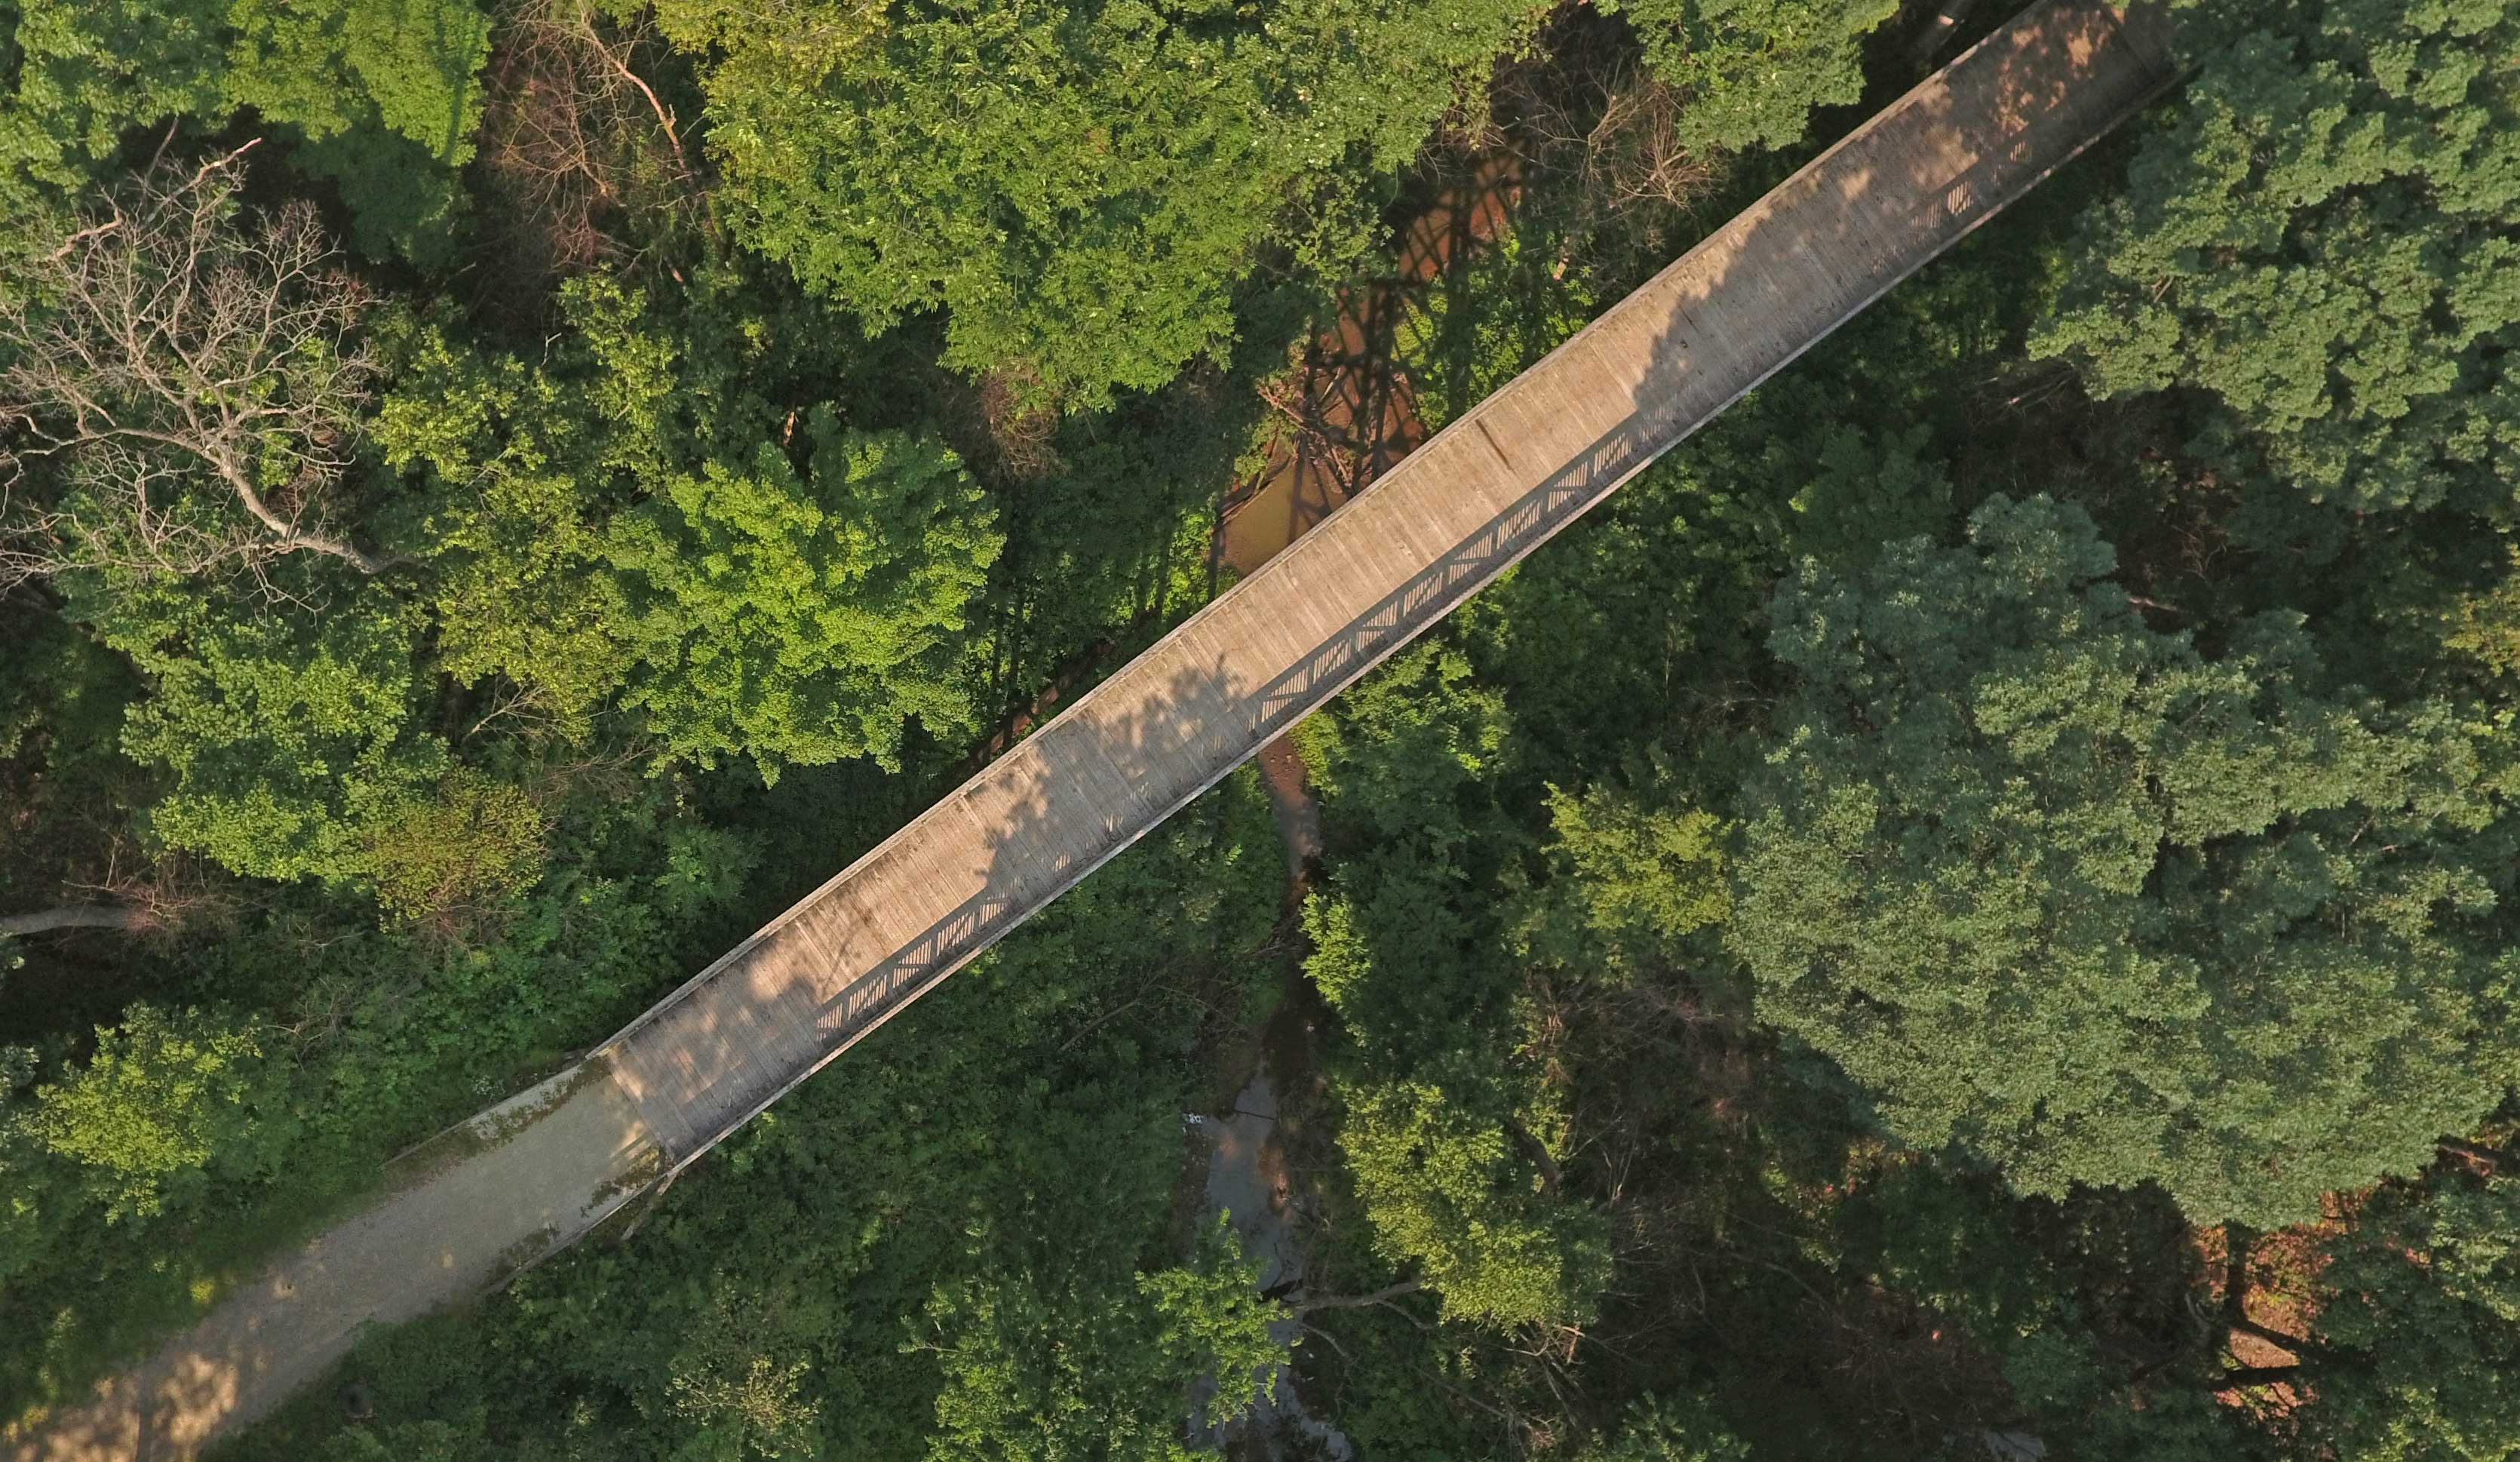 An aerial view of the big bridge along the Plum Creek Greenway Trail.